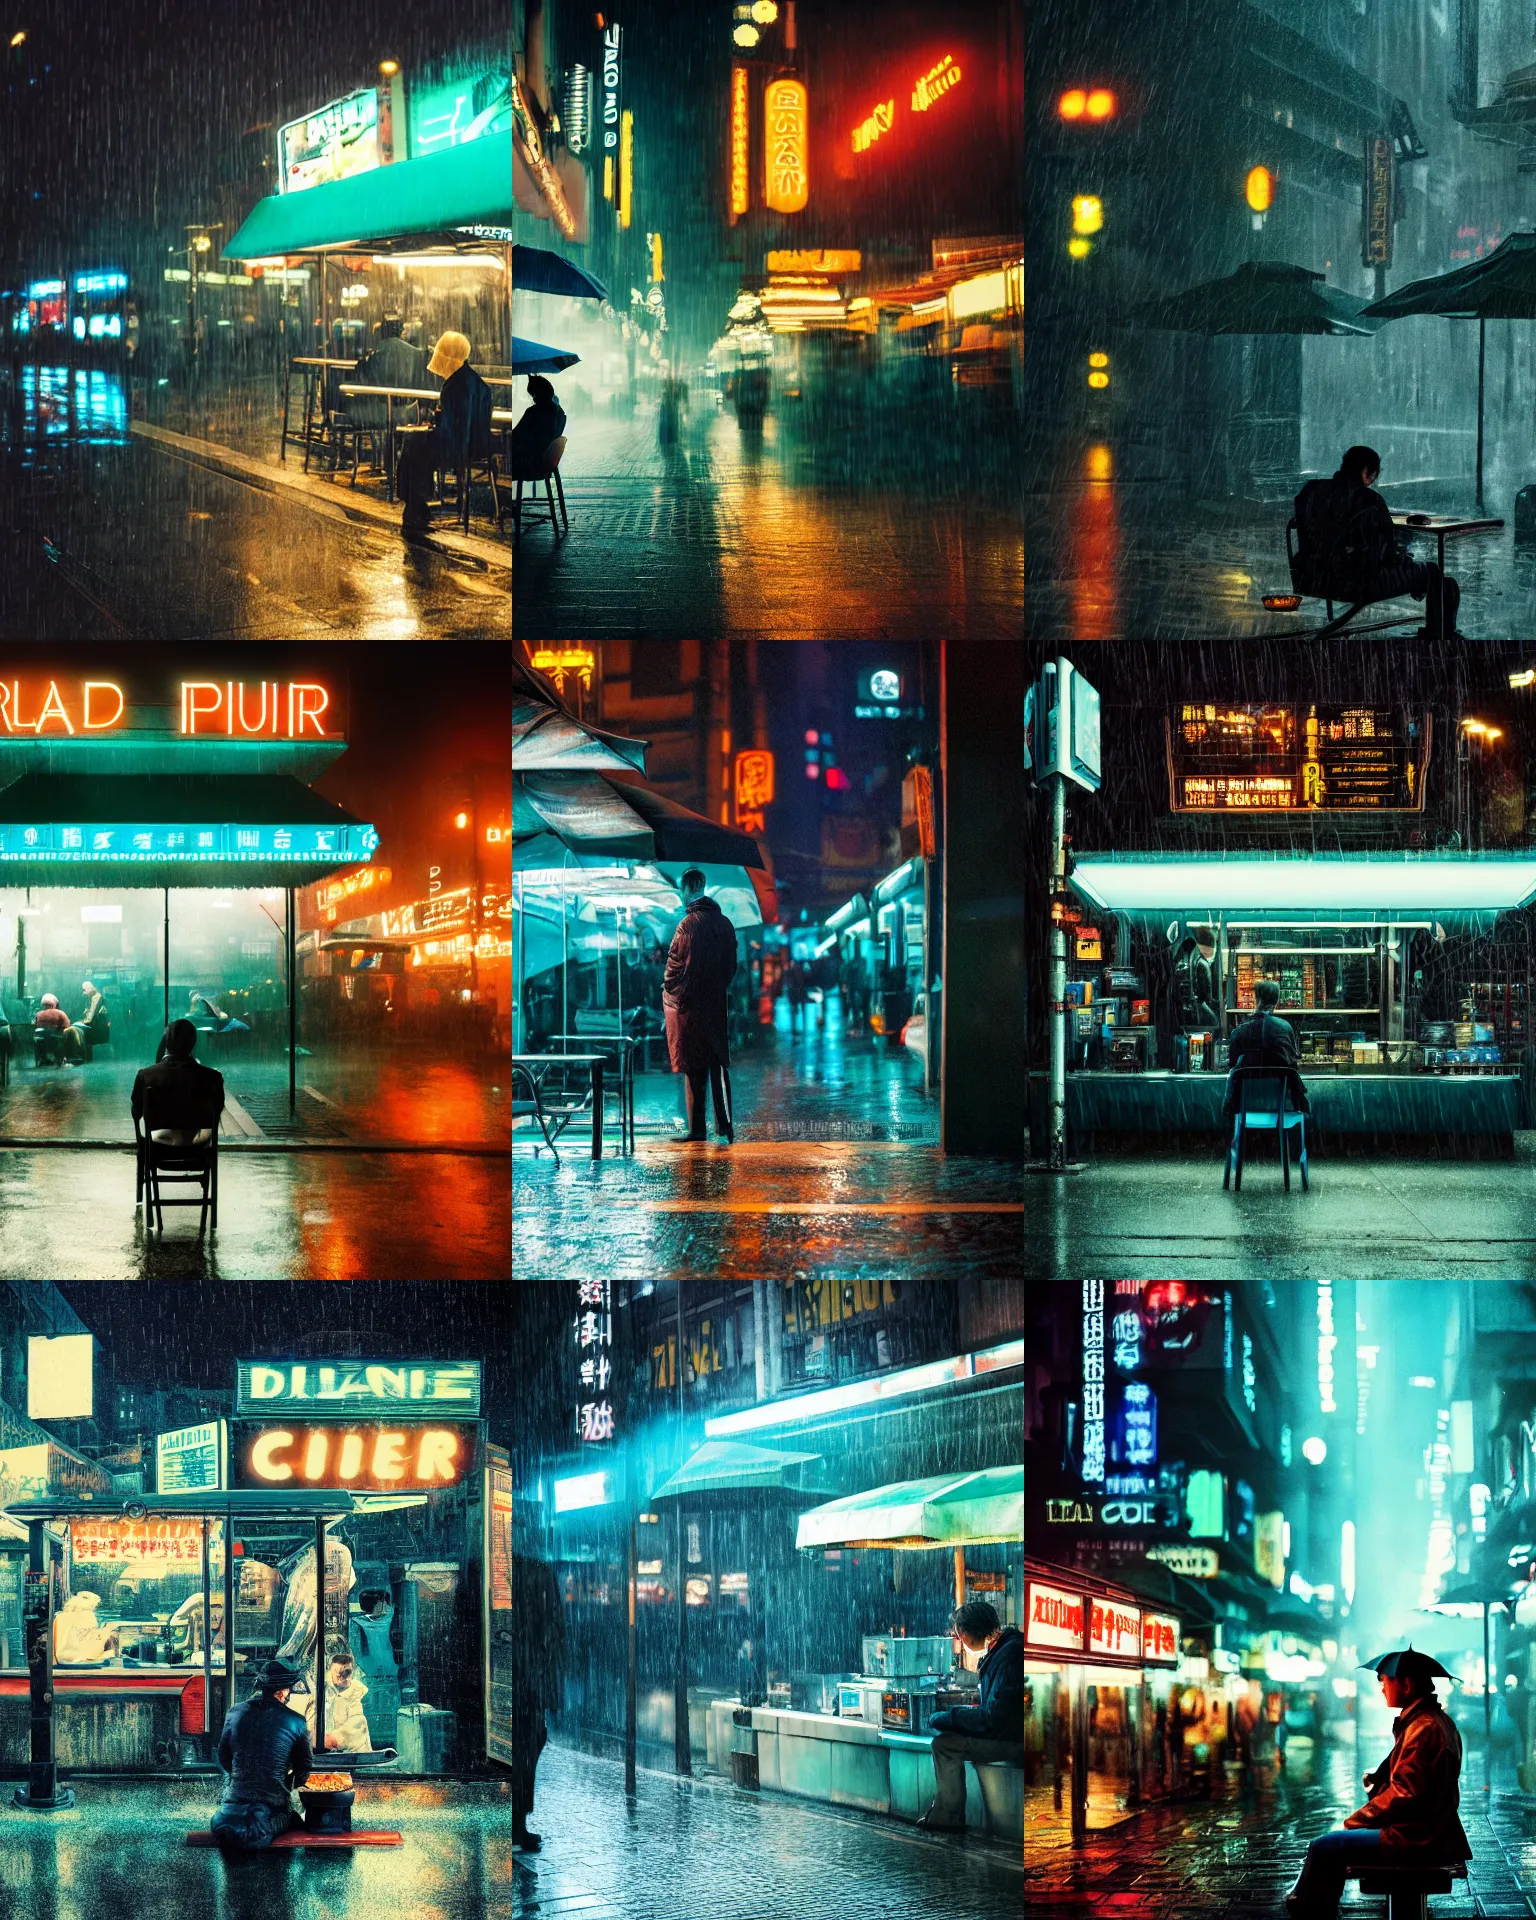 Prompt: blade runner movie still of a customer sitting at an outdoor noodle stand, hyper realism, rack focus, close establishing shot, rainy night, monochromatic teal, steamy, desaturated colors, dark teal lighting, soft dramatic lighting, 4 k digital camera